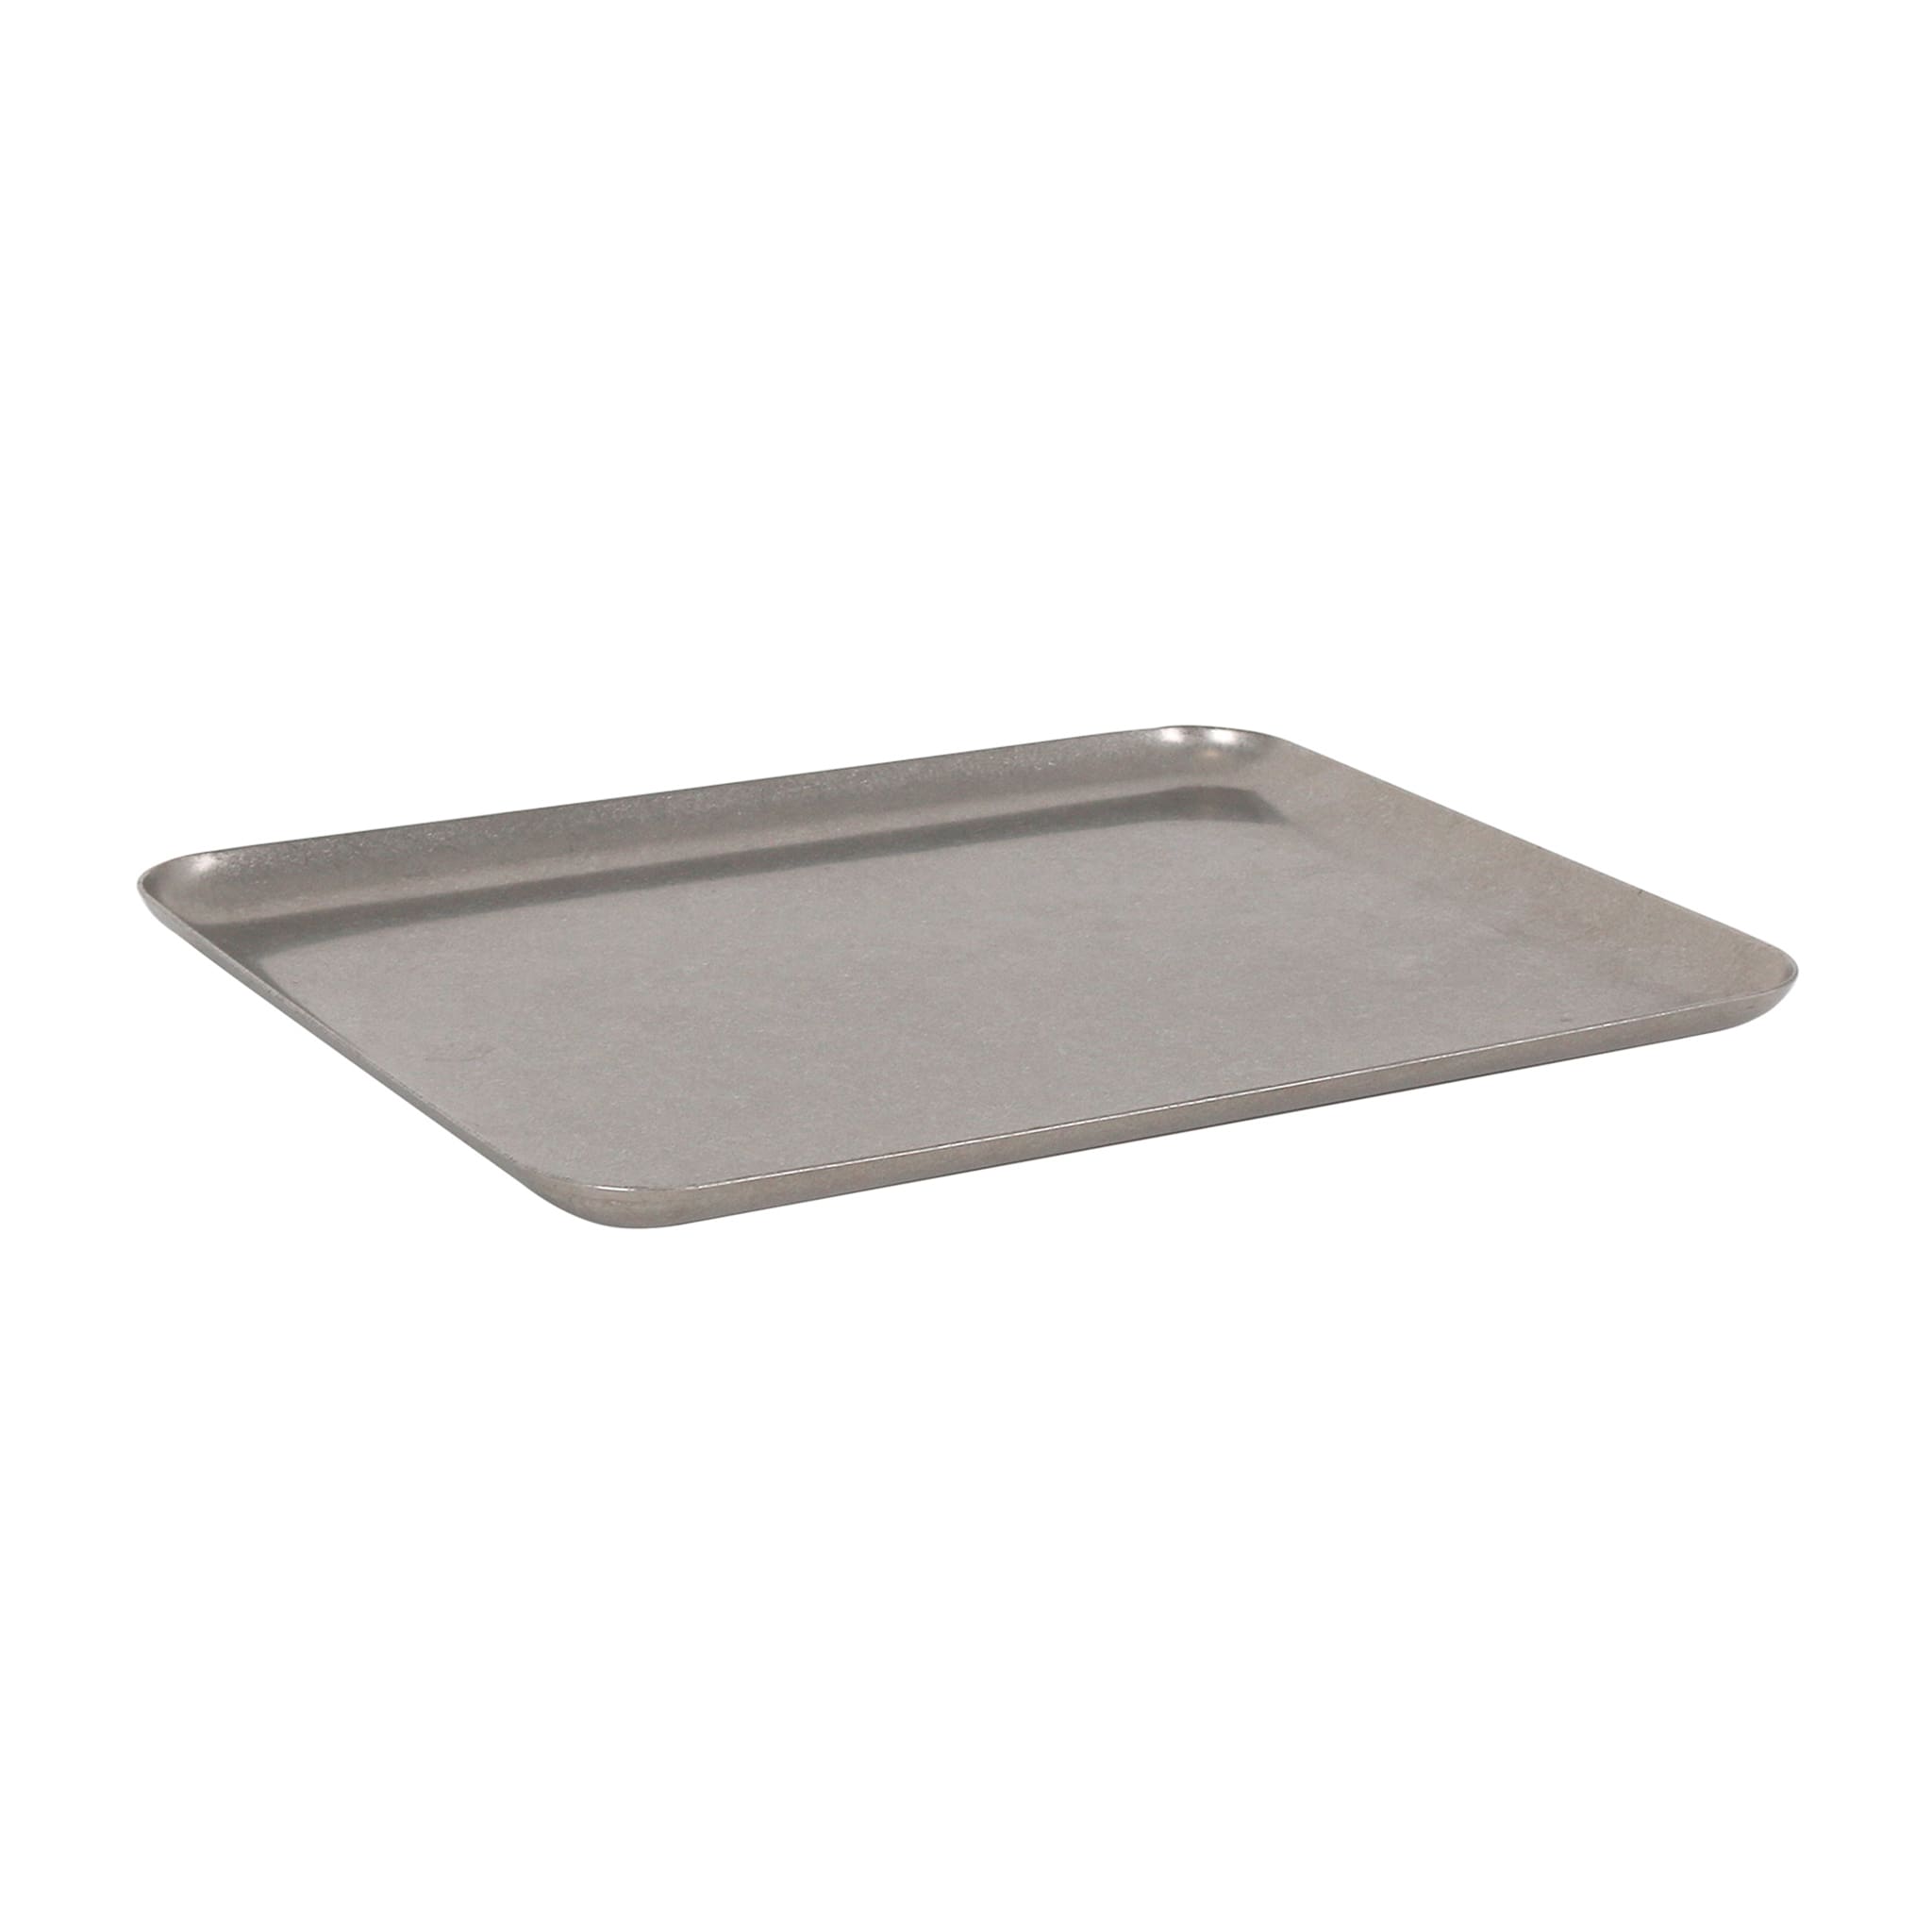 Vintage Style Stainless Steel Rectangular Serving Tray, 20.5x15.5cm